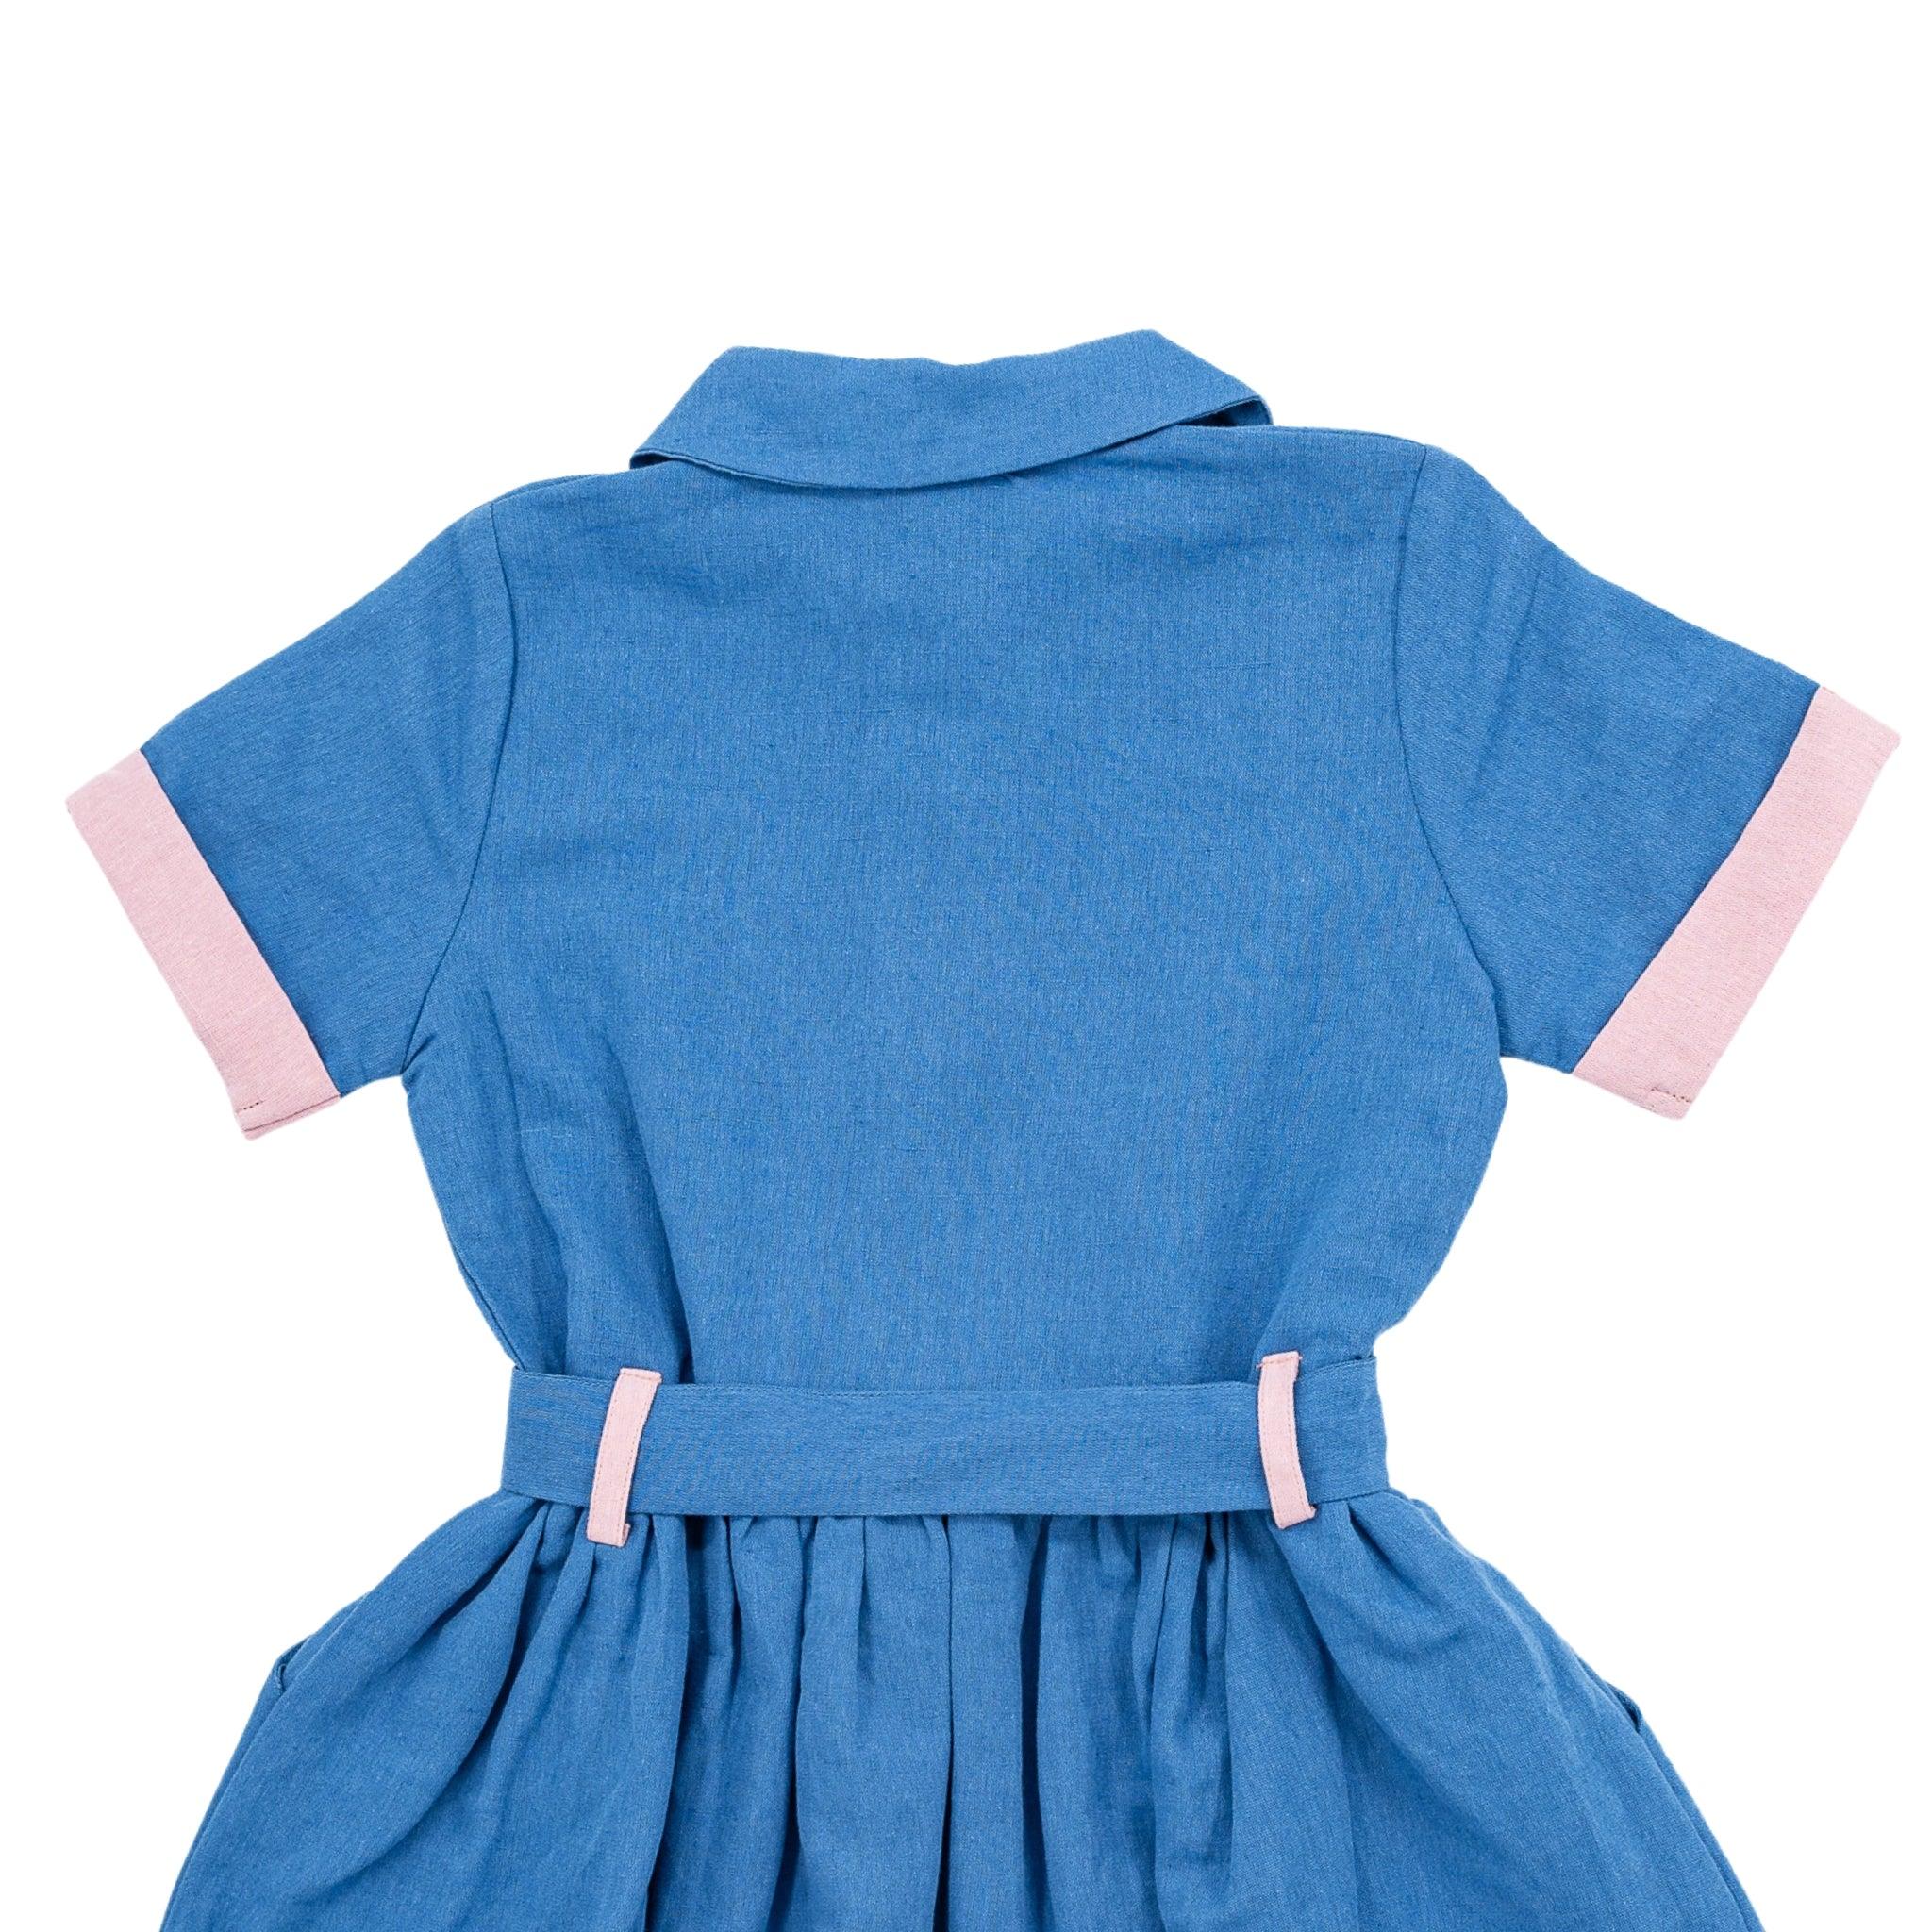 Blue Karee Parisian Blue Linen Dress for Girls with short sleeves, pink cuffs, and a cinched waist displayed against a white background.